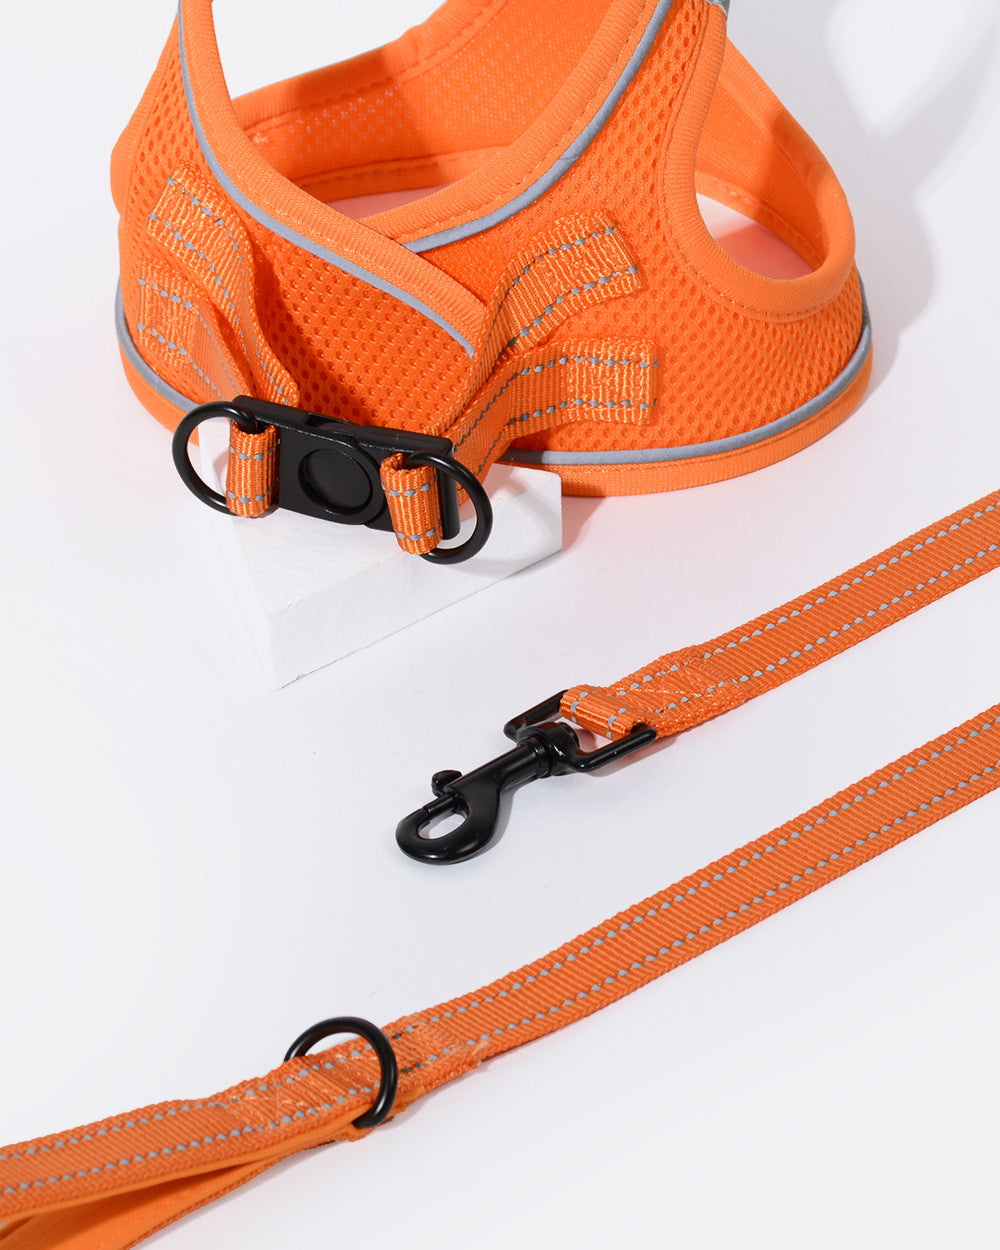 OxyMesh Velcro Step-in Harness and Leash Set - Neon Orange